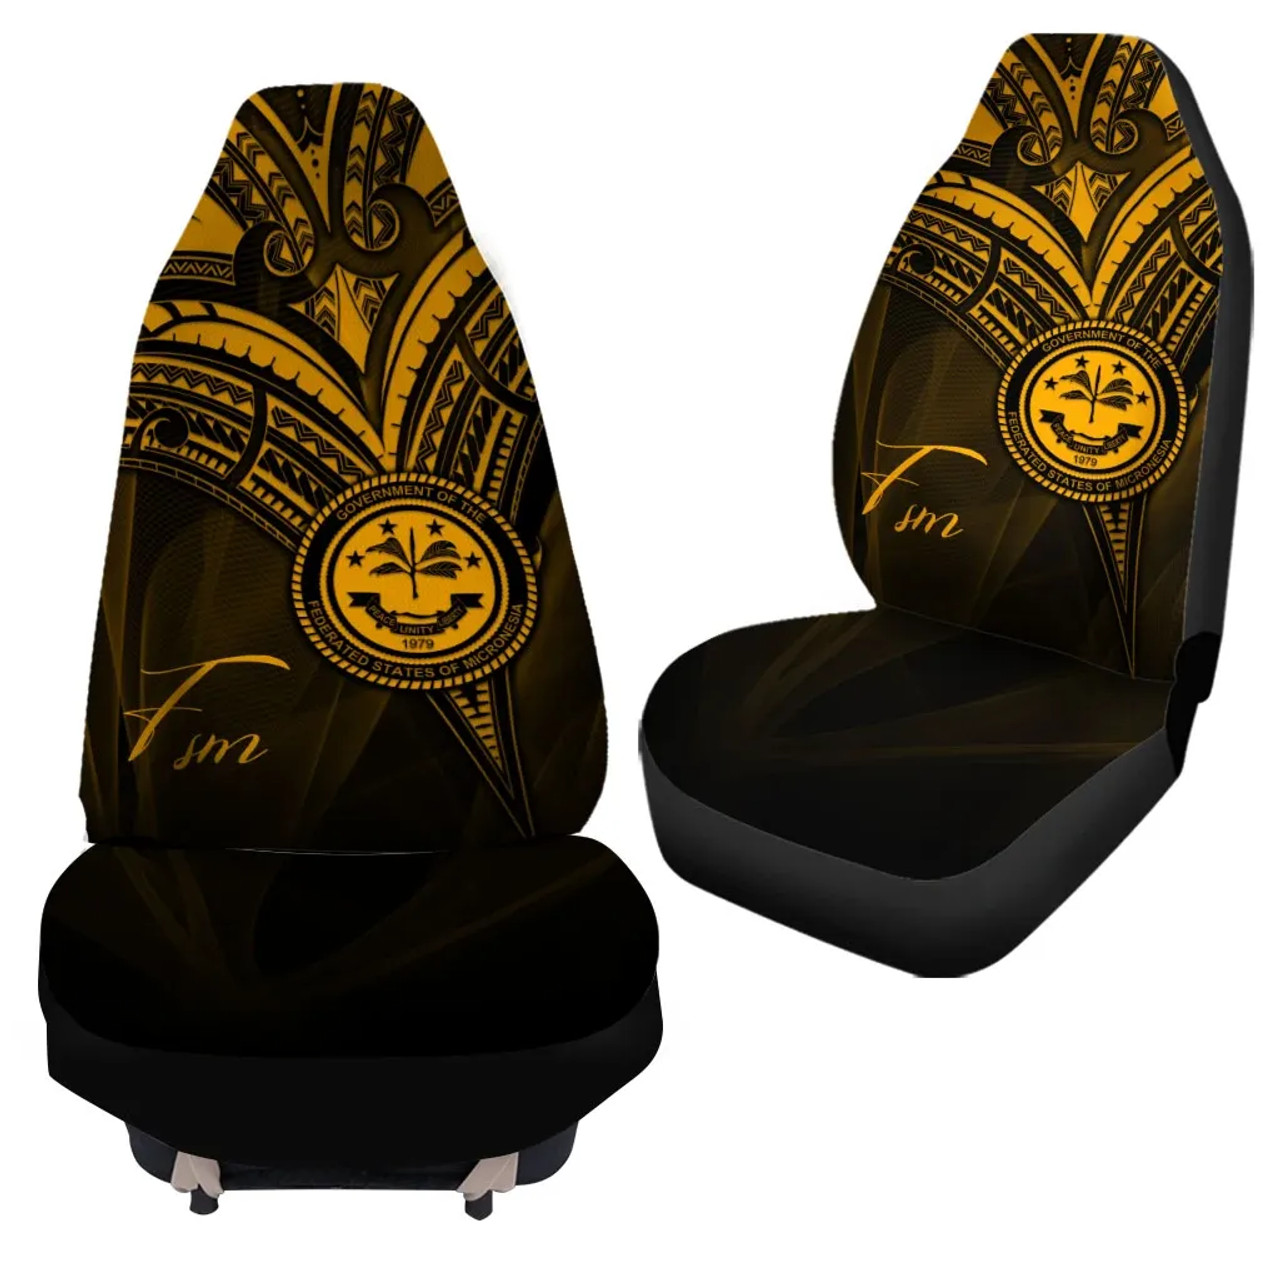 Federated States of Micronesia Car Seat Cover - Gold Color Cross Style